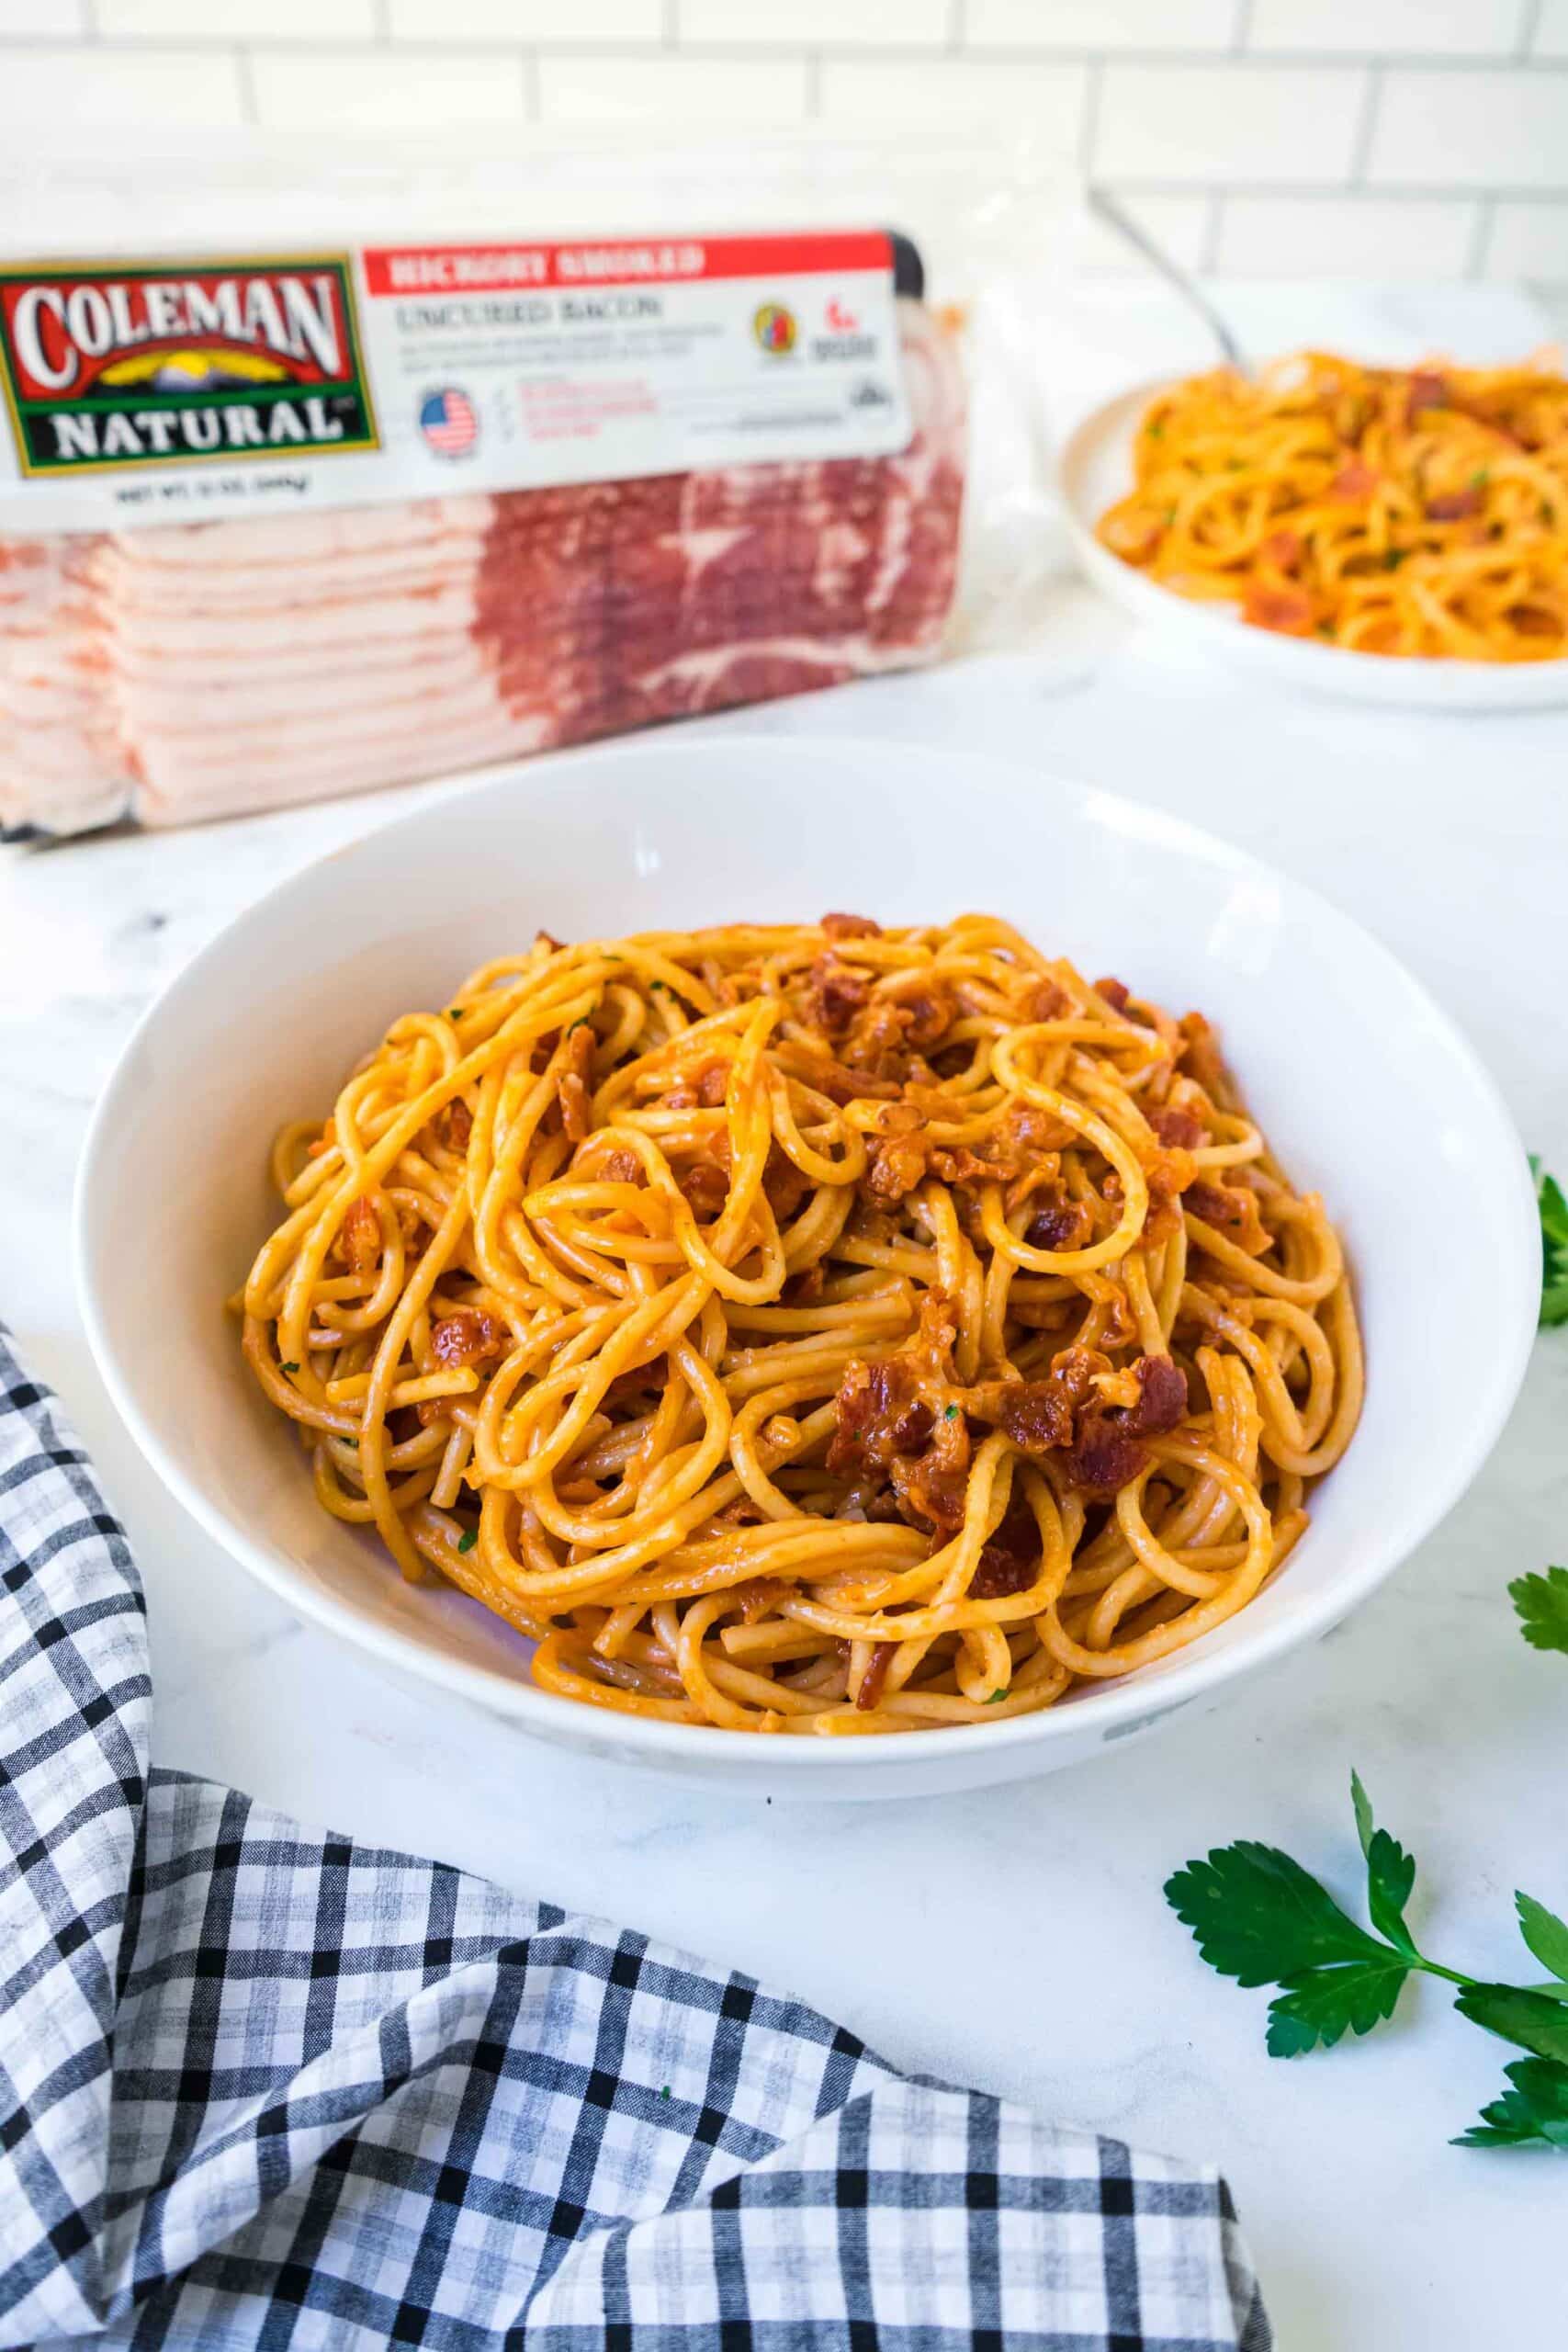 A bowl of Creamy Spaghetti with Bacon with the Coleman Natural Bacon package in the background.